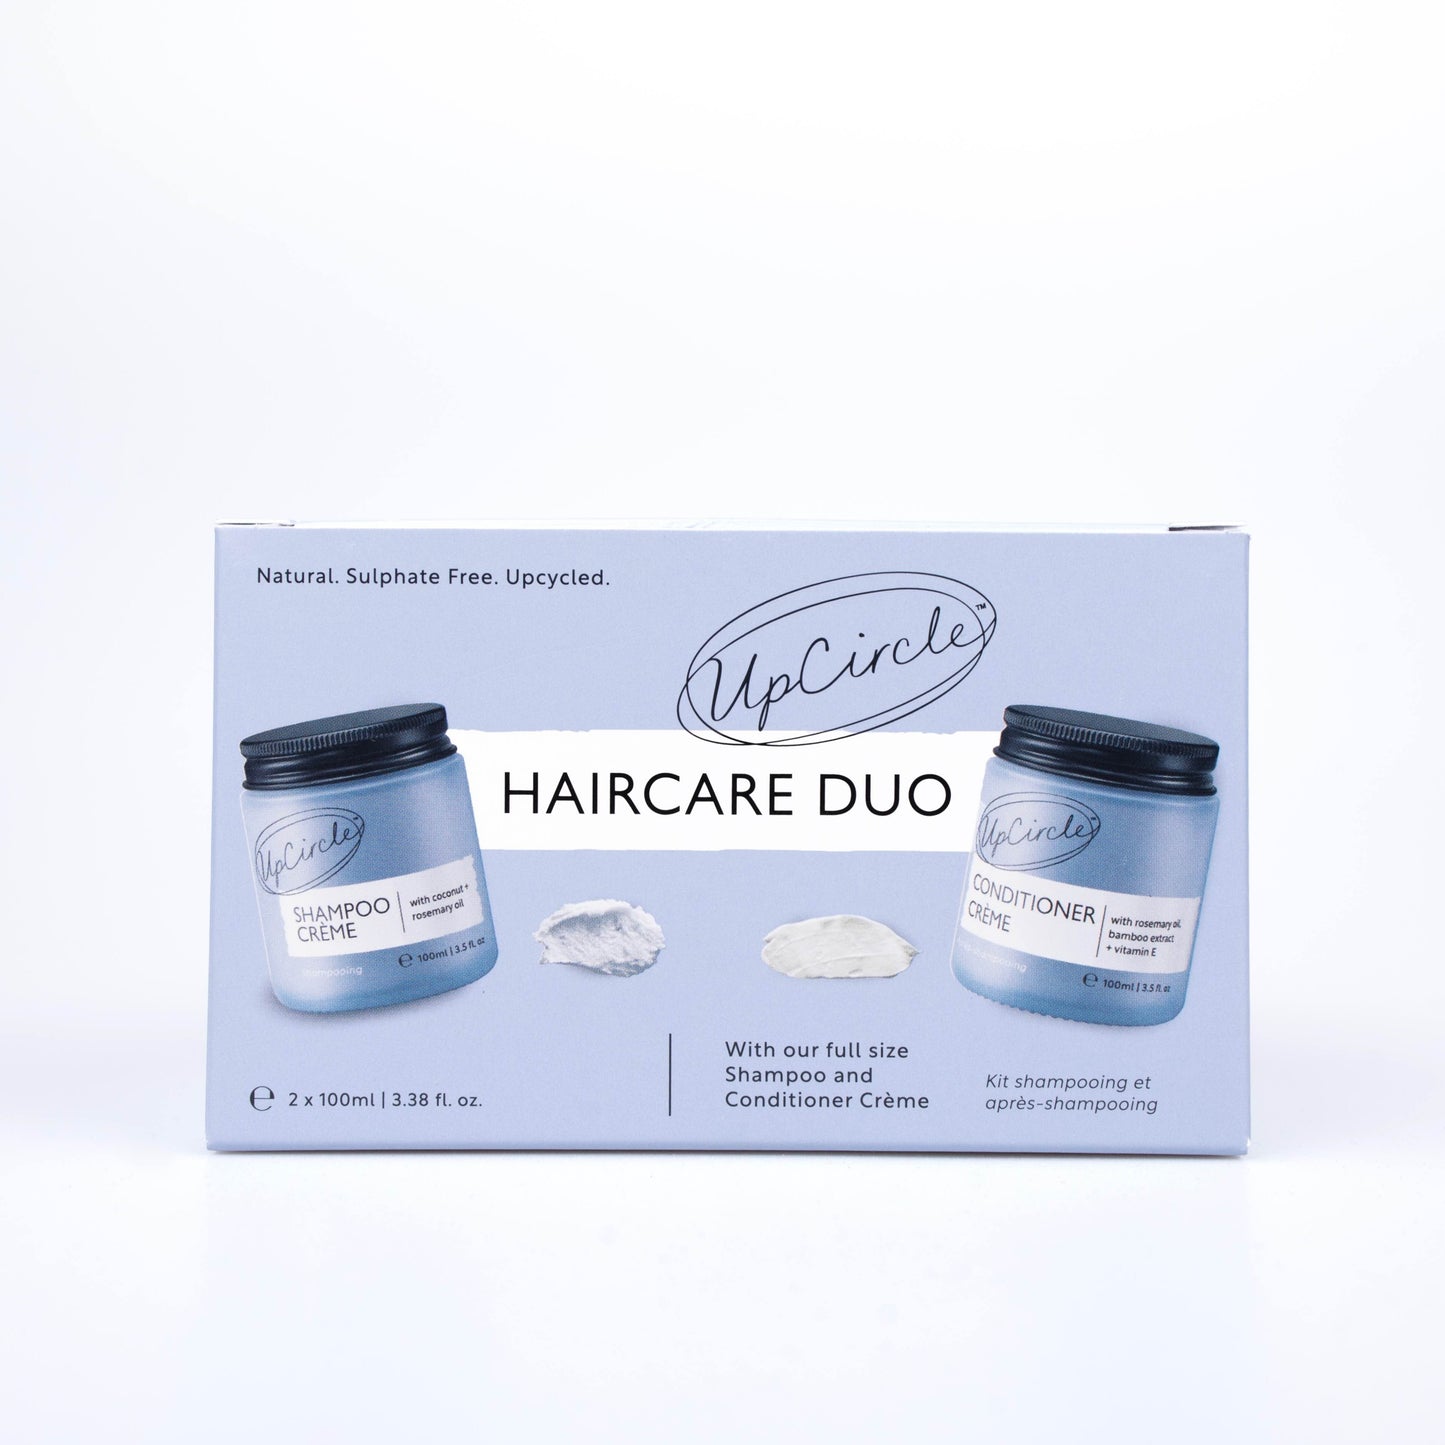 upcircle hair care duo. Photo of the blue cardboard box on a white background